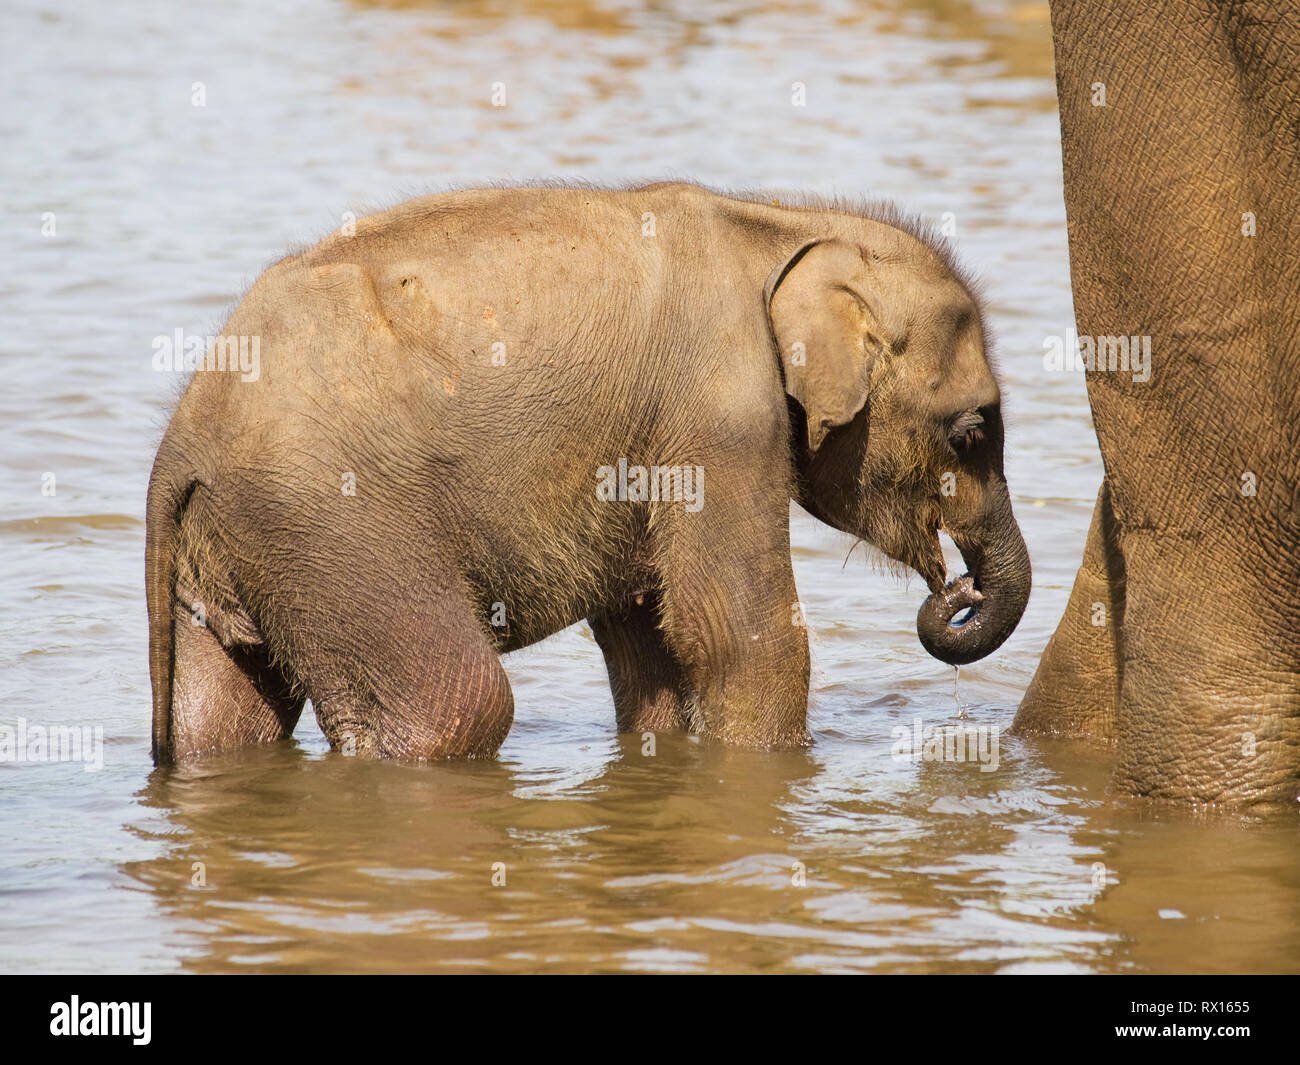 Baby of asian elephant bathing in river Stock Photo